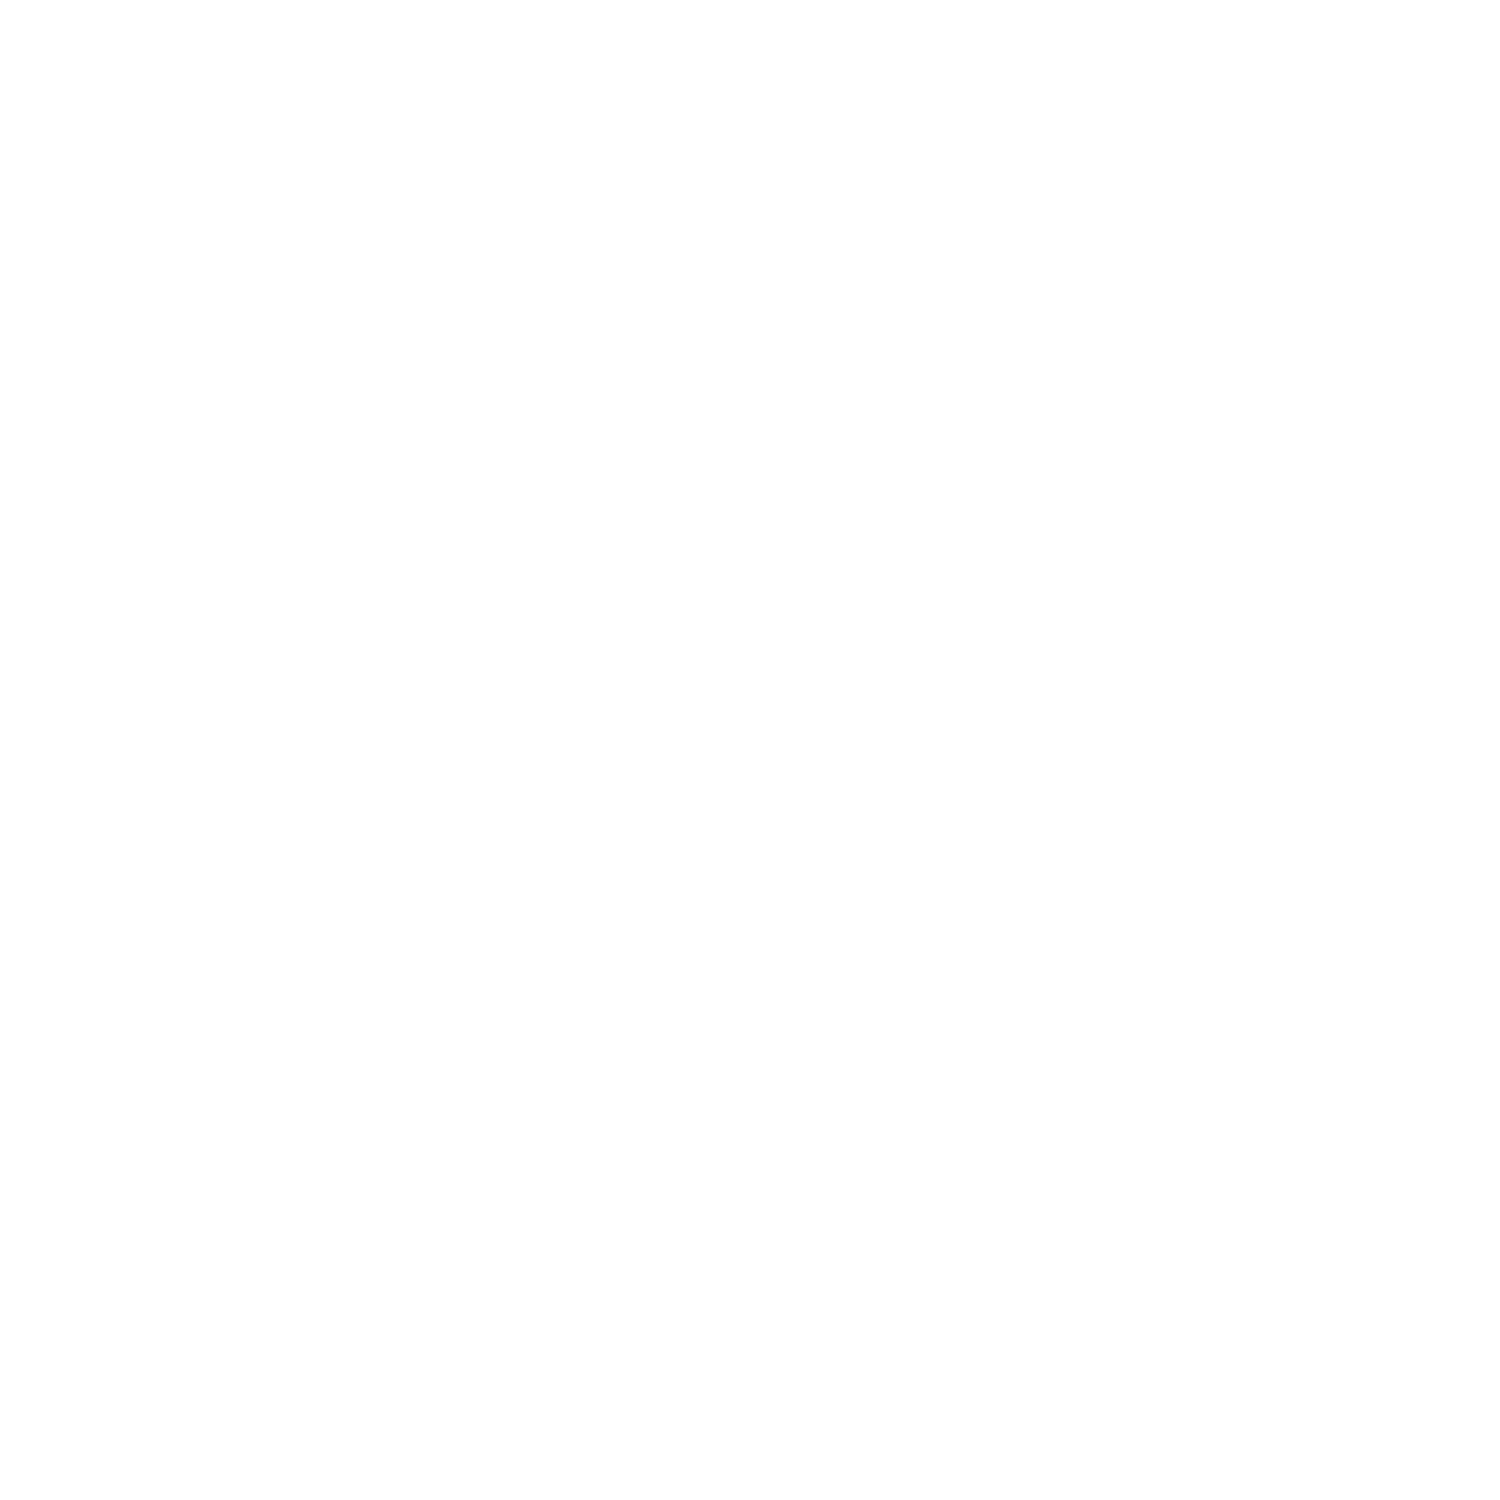 AR Immigration Paralegal Support